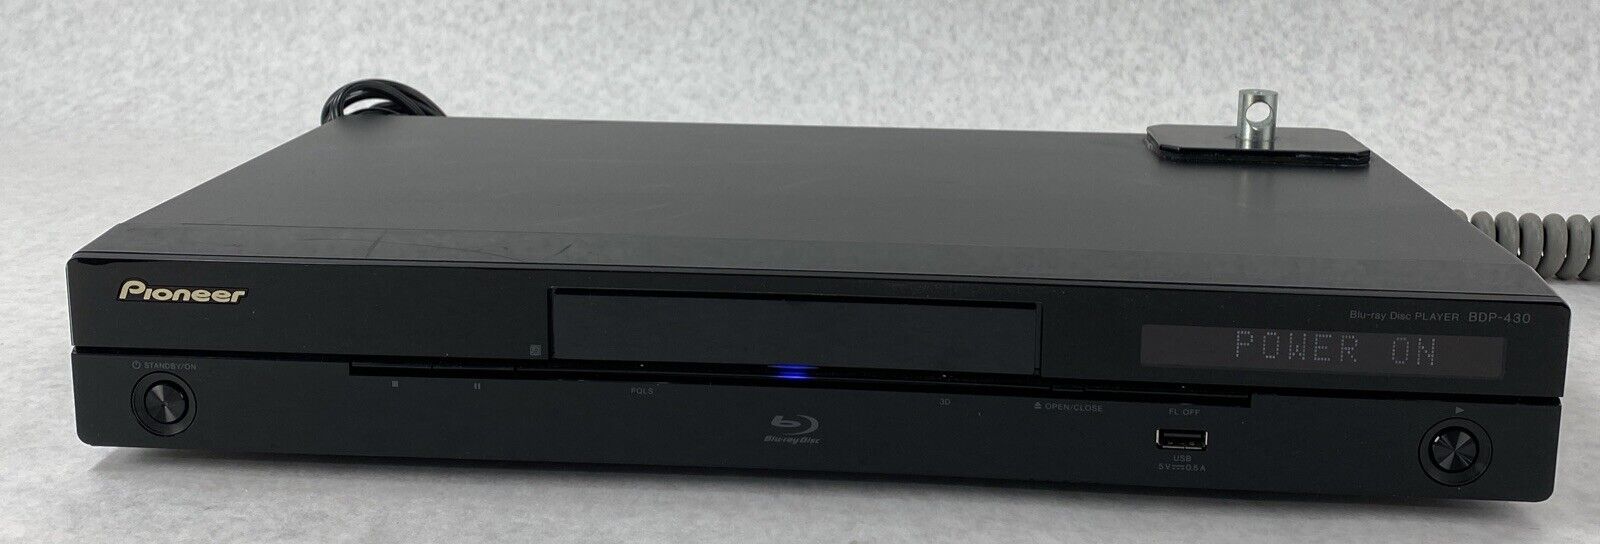 Pioneer BDP-430 3D DVD Blu-Ray HD Stream Network Player TESTED but NO REMOTE